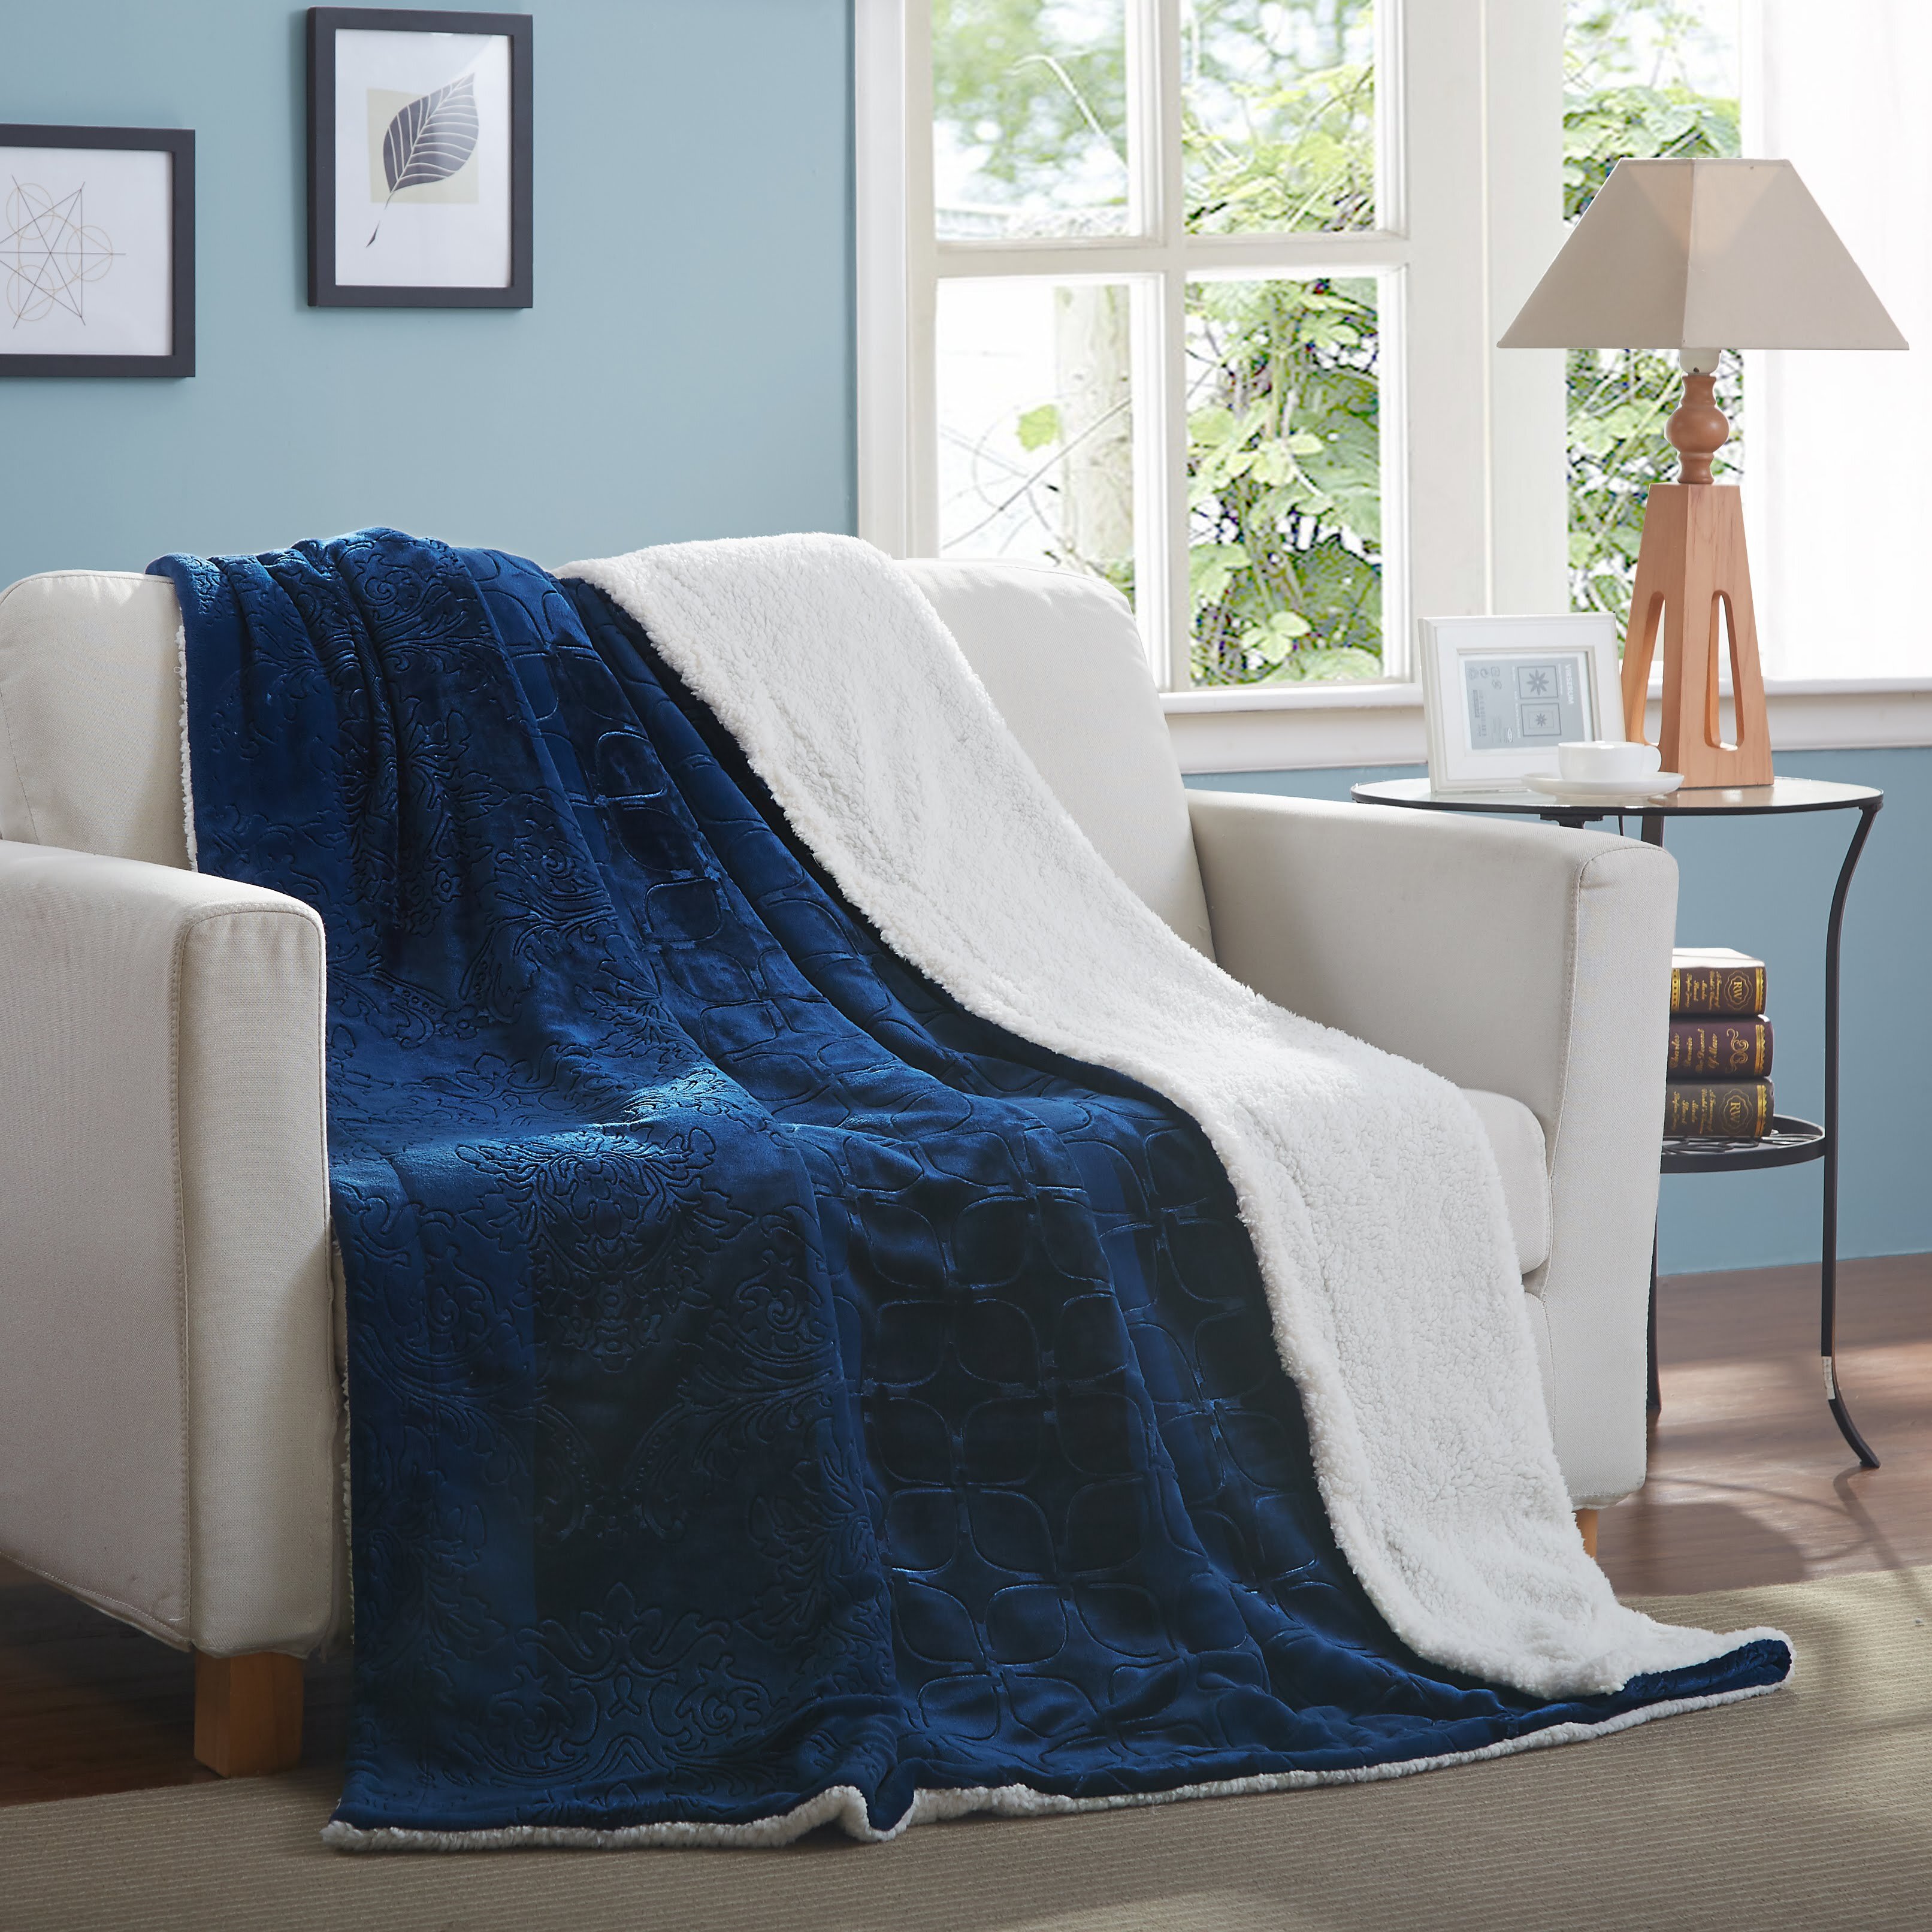 Perfect for Kid & Adult. Plush Fuzzy Soft Warm Luxury Berber Fleece Blankets Argstar Sherpa Fleece Blanket Throw Size Mint Blue for Bed Or Couch